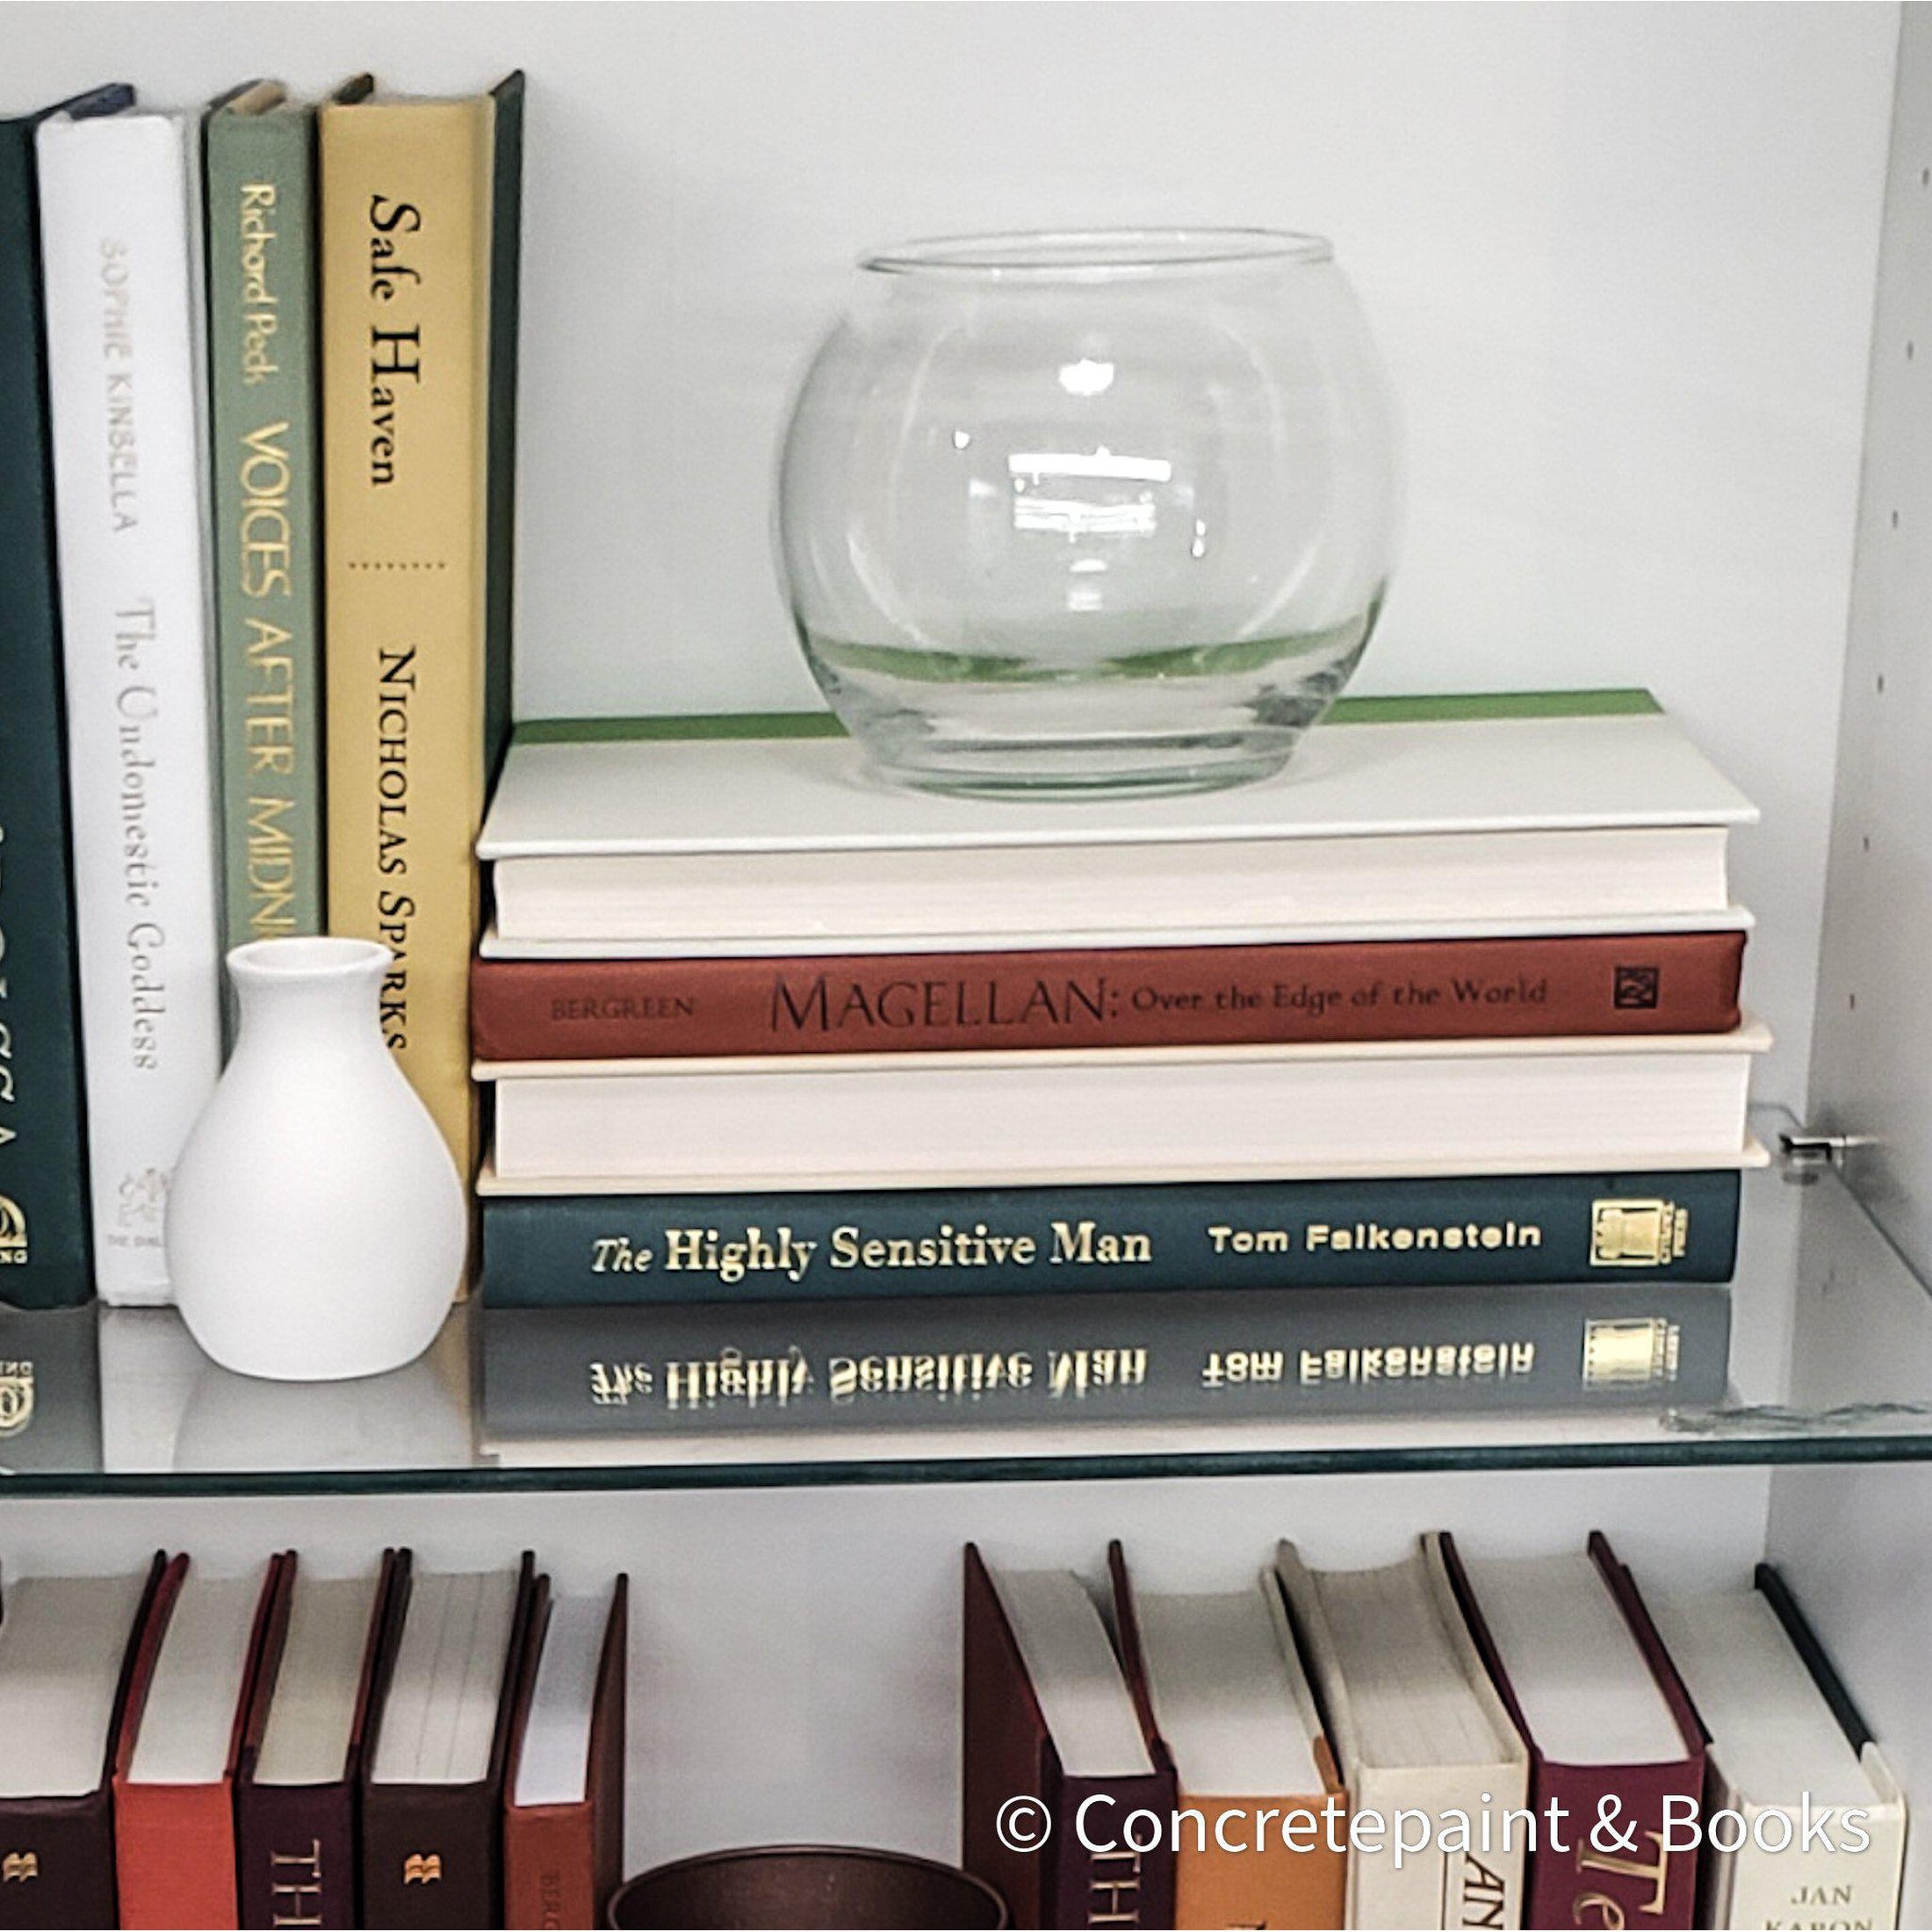 Bold Nature Tones 5 | Decorative Books & Glass Bubble-Set of Decorative Books and Accents-[stack of real books for decorating]-[set of books with decorative accents]